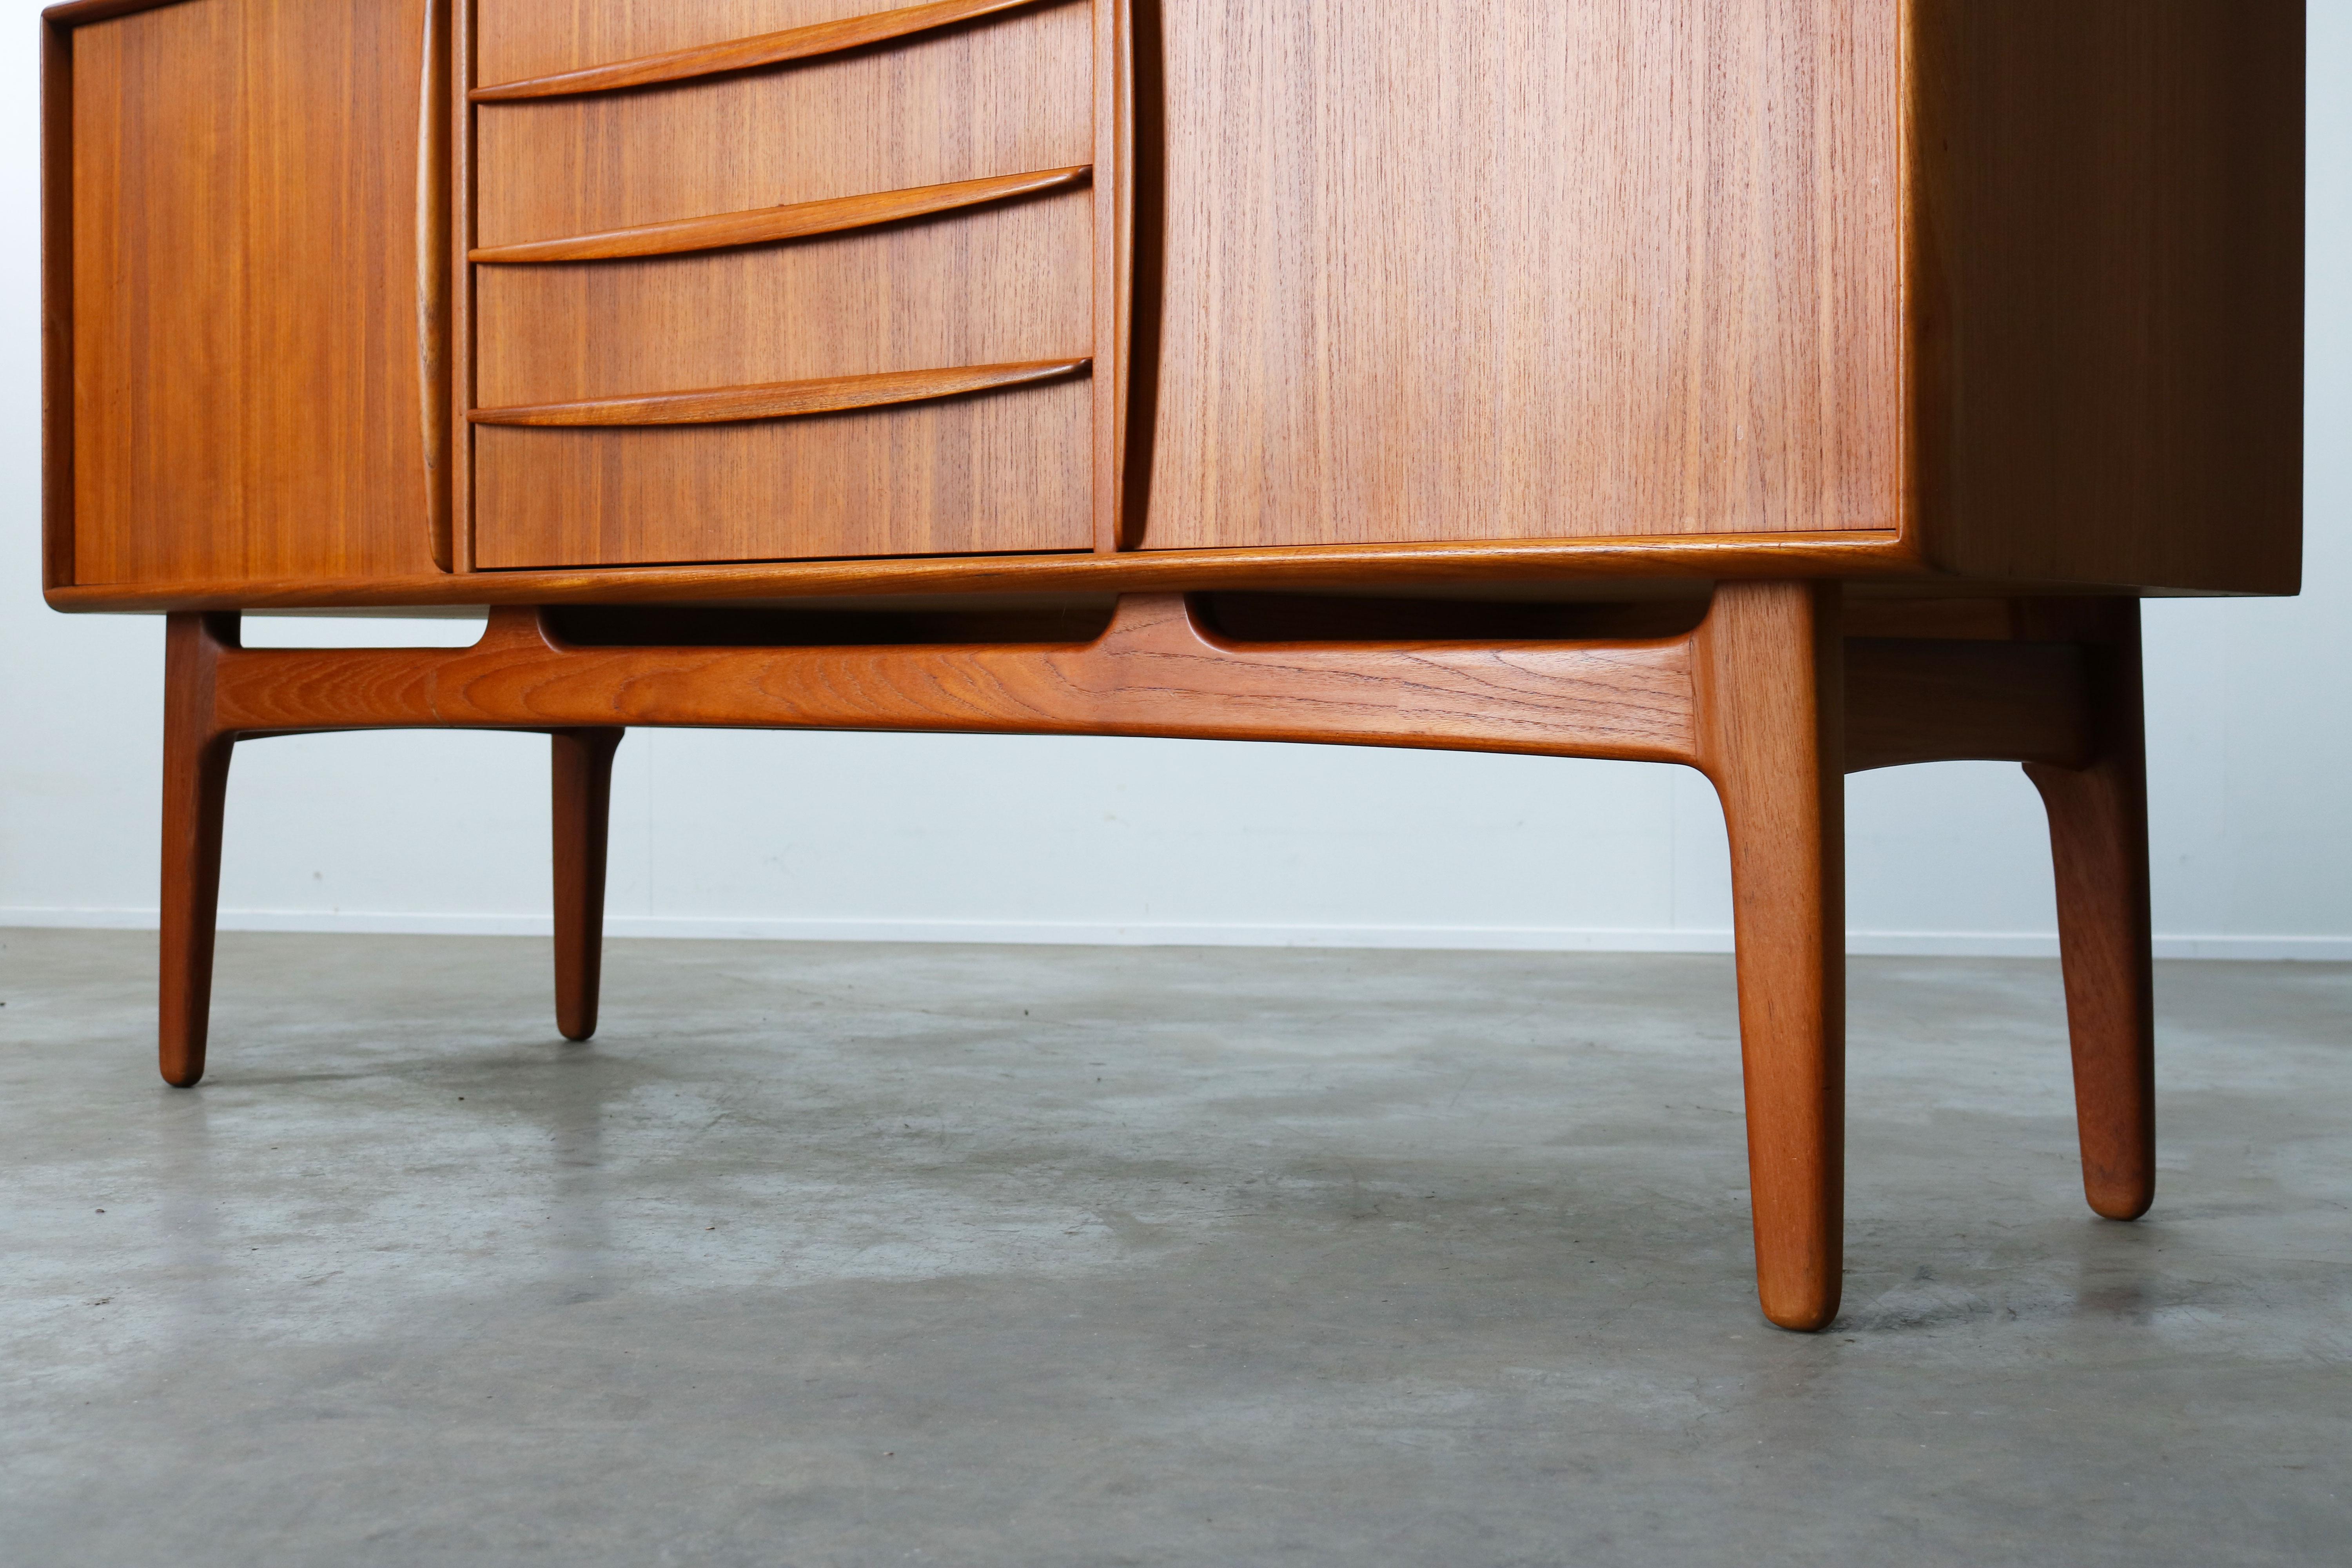 Mid-20th Century Danish Design Credenza / Sideboard by Svend Aage Madsen for K Knudsen & Son 1950